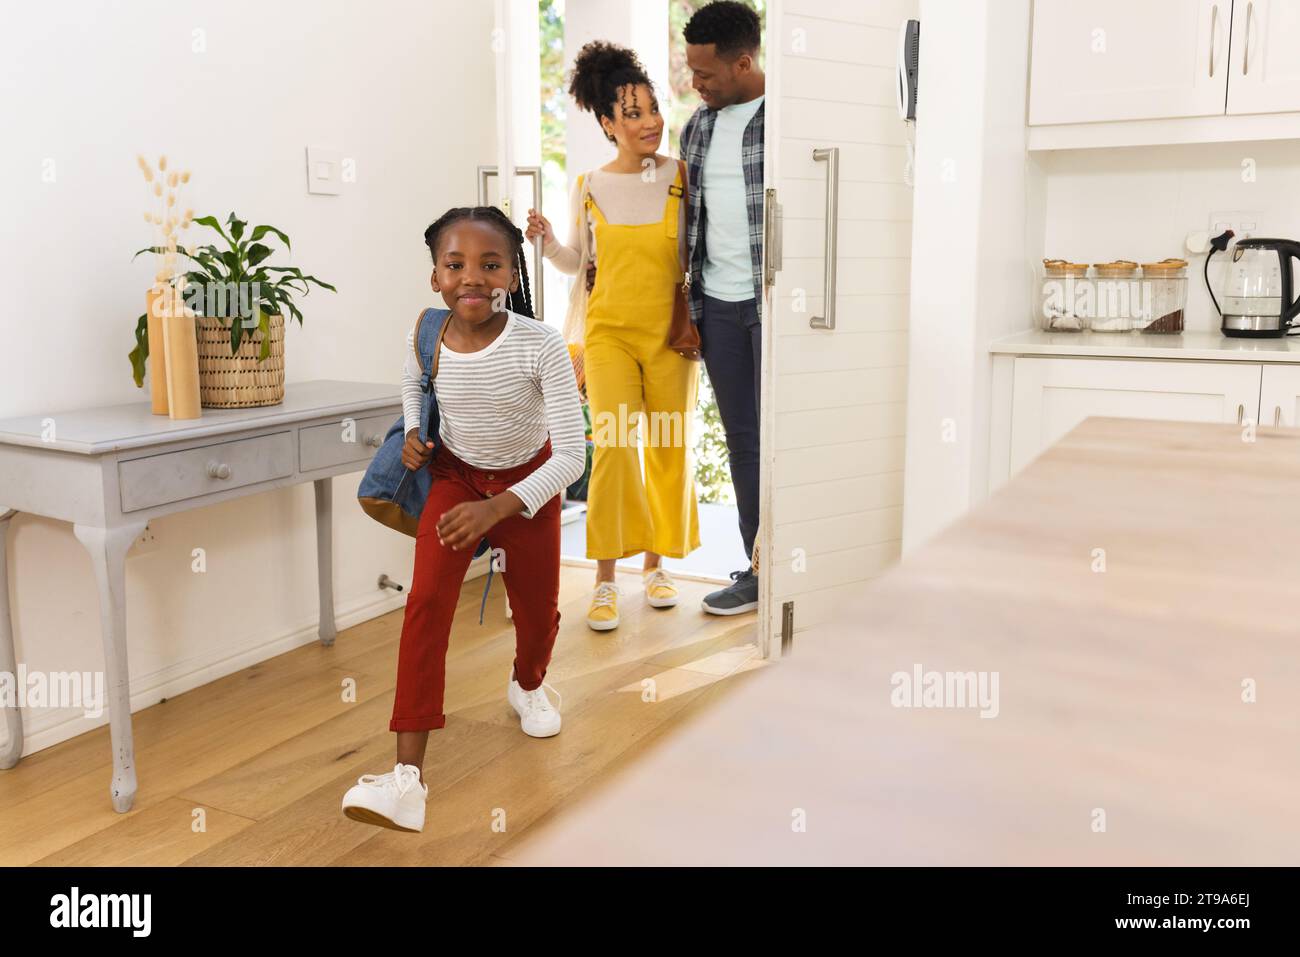 Happy african american family coming home, copy space. Expression, togetherness, parenthood, childhood and domestic life, unaltered. Stock Photo